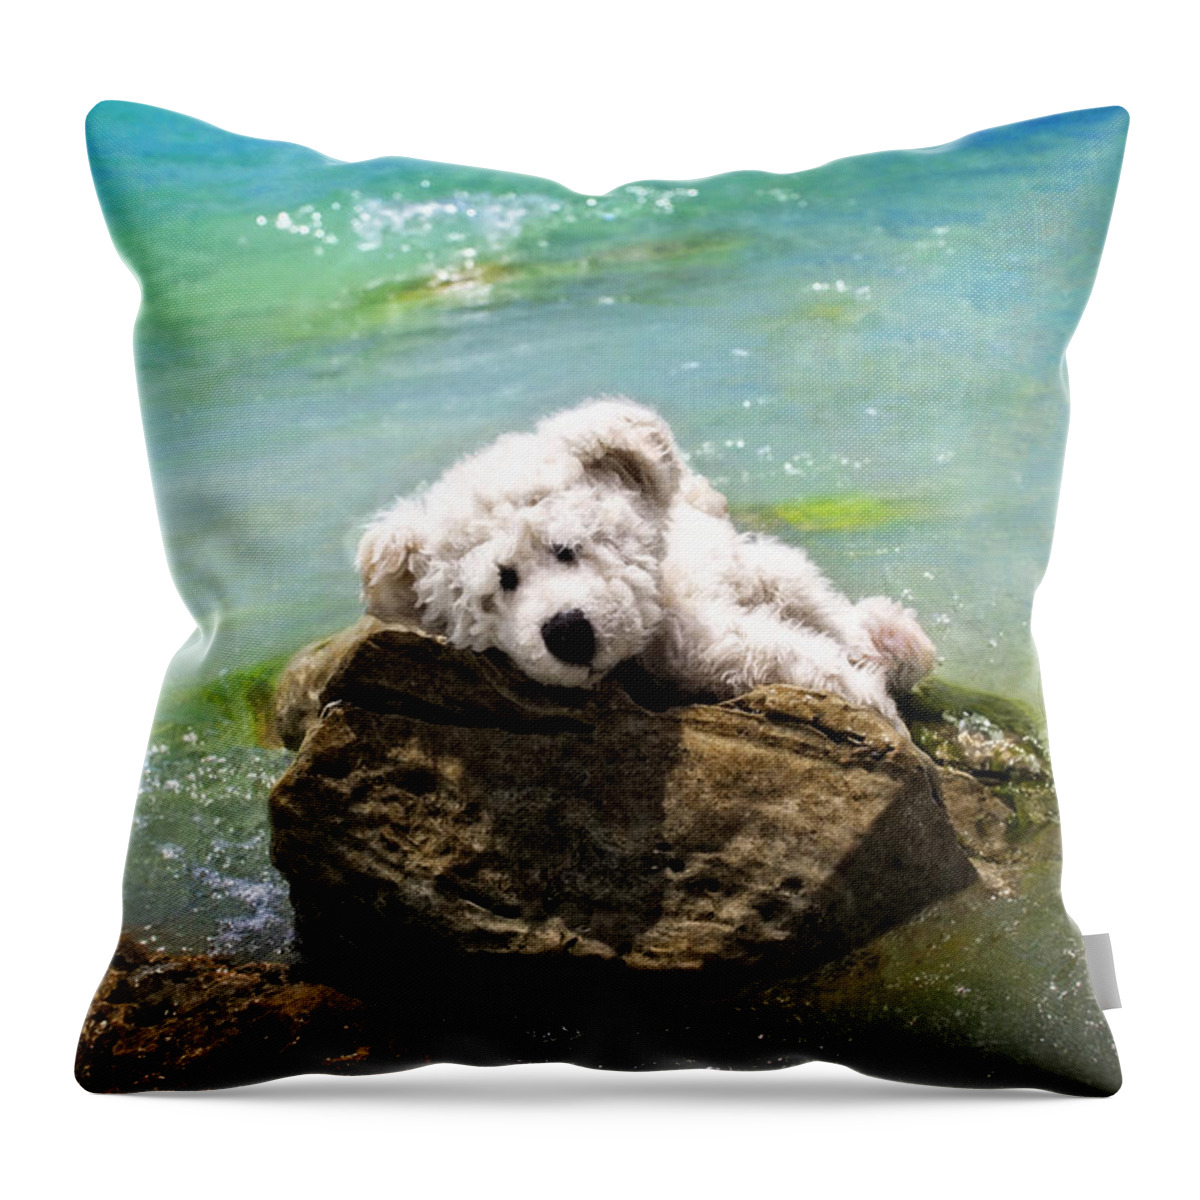 Bear Throw Pillow featuring the painting On The Rocks - Teddy Bear Art By William Patrick and Sharon Cummings by Sharon Cummings